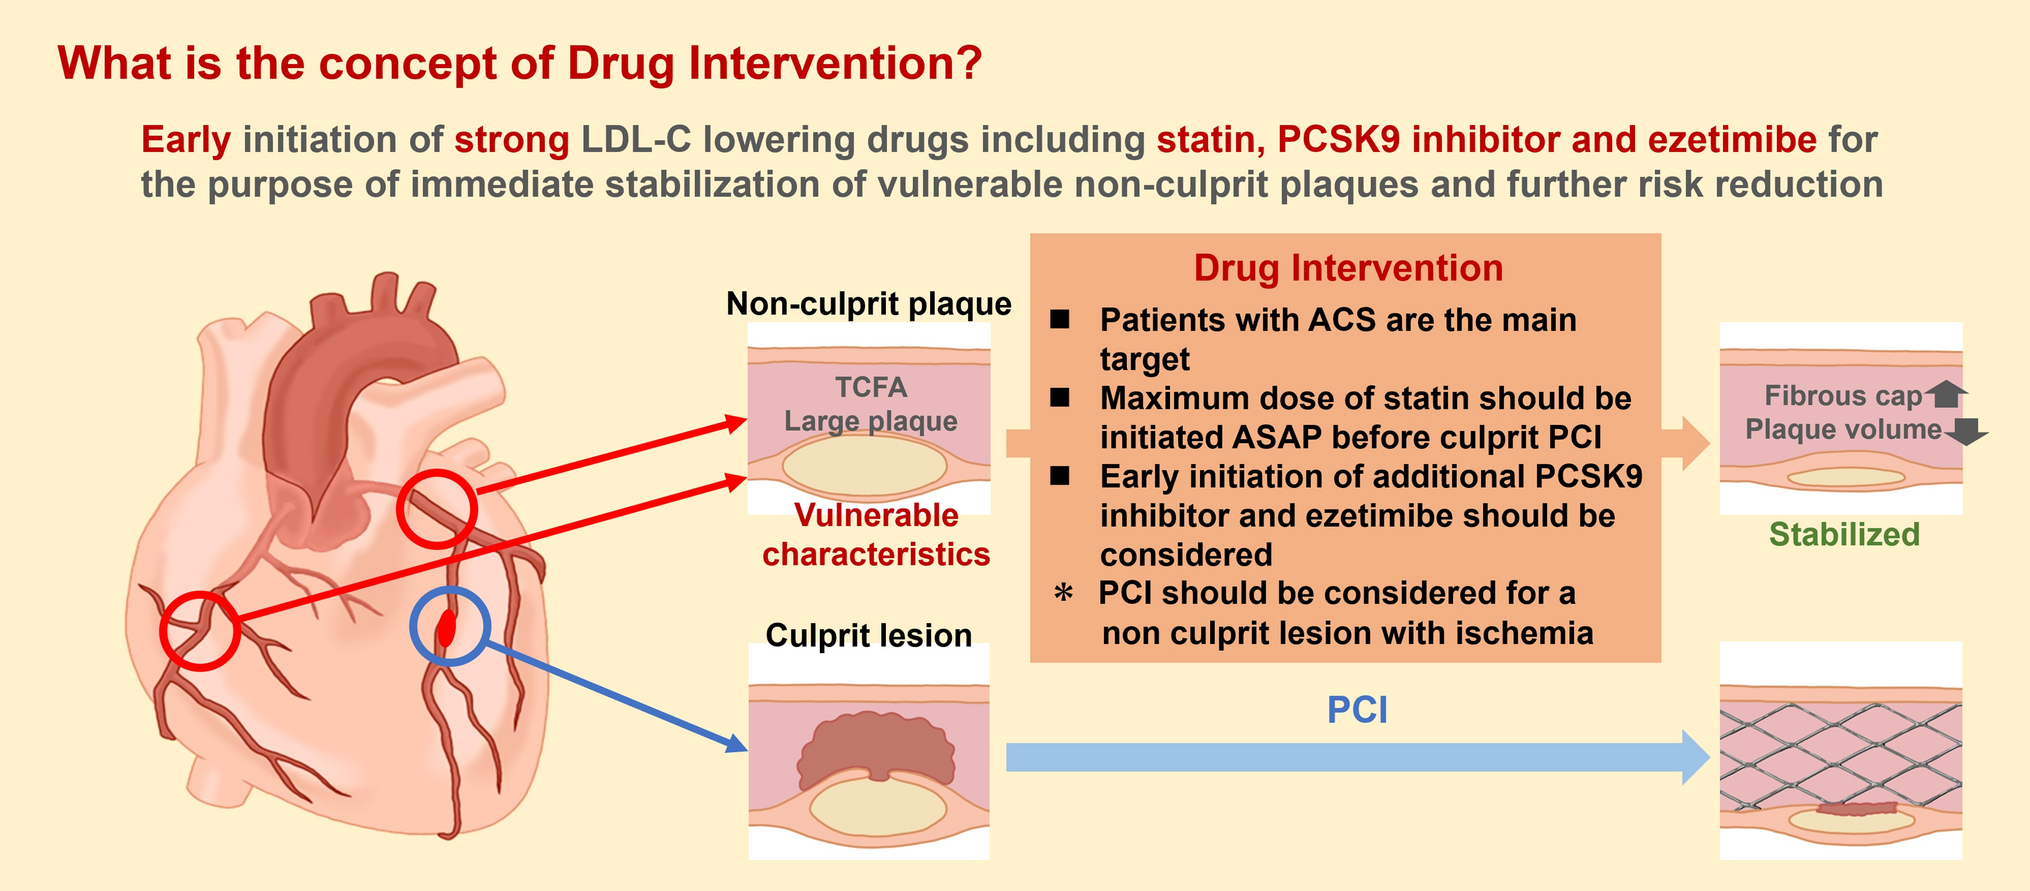 Drug intervention as an emerging concept for secondary prevention in patients with coronary disease